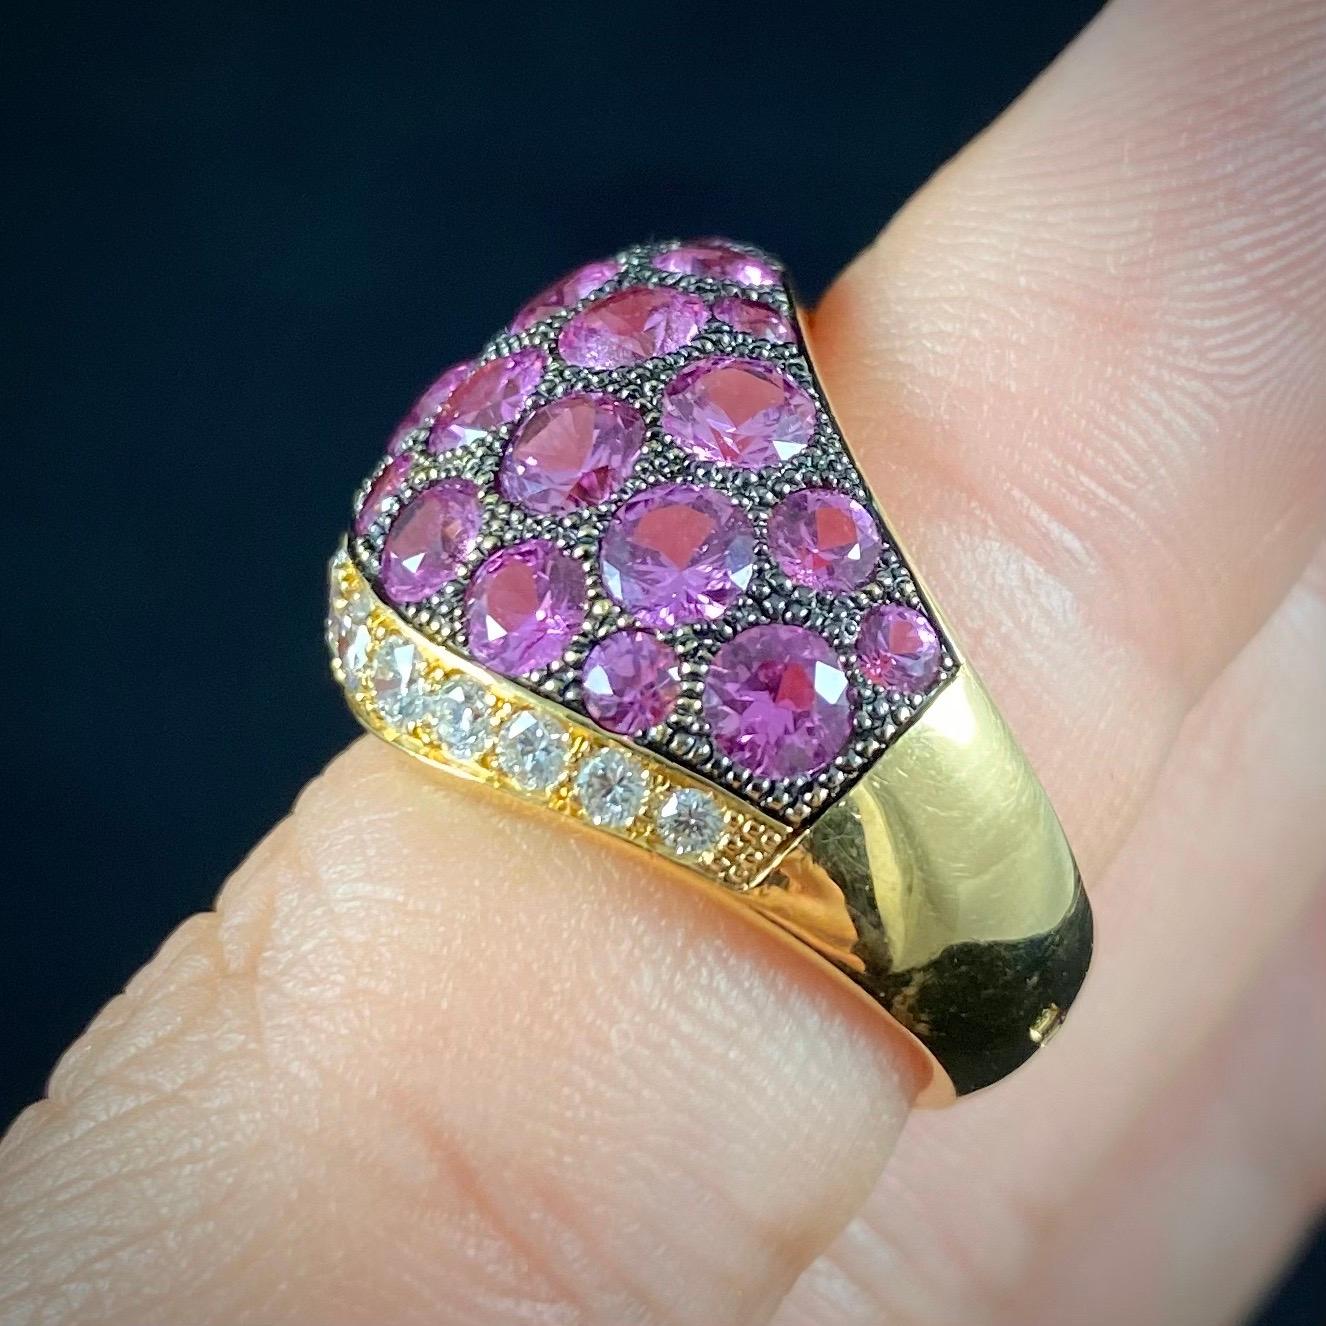 de GRISOGONO Pink Sapphire Diamond Pave Wishbone Bombe Cocktail Ring Yellow Gold For Sale 1